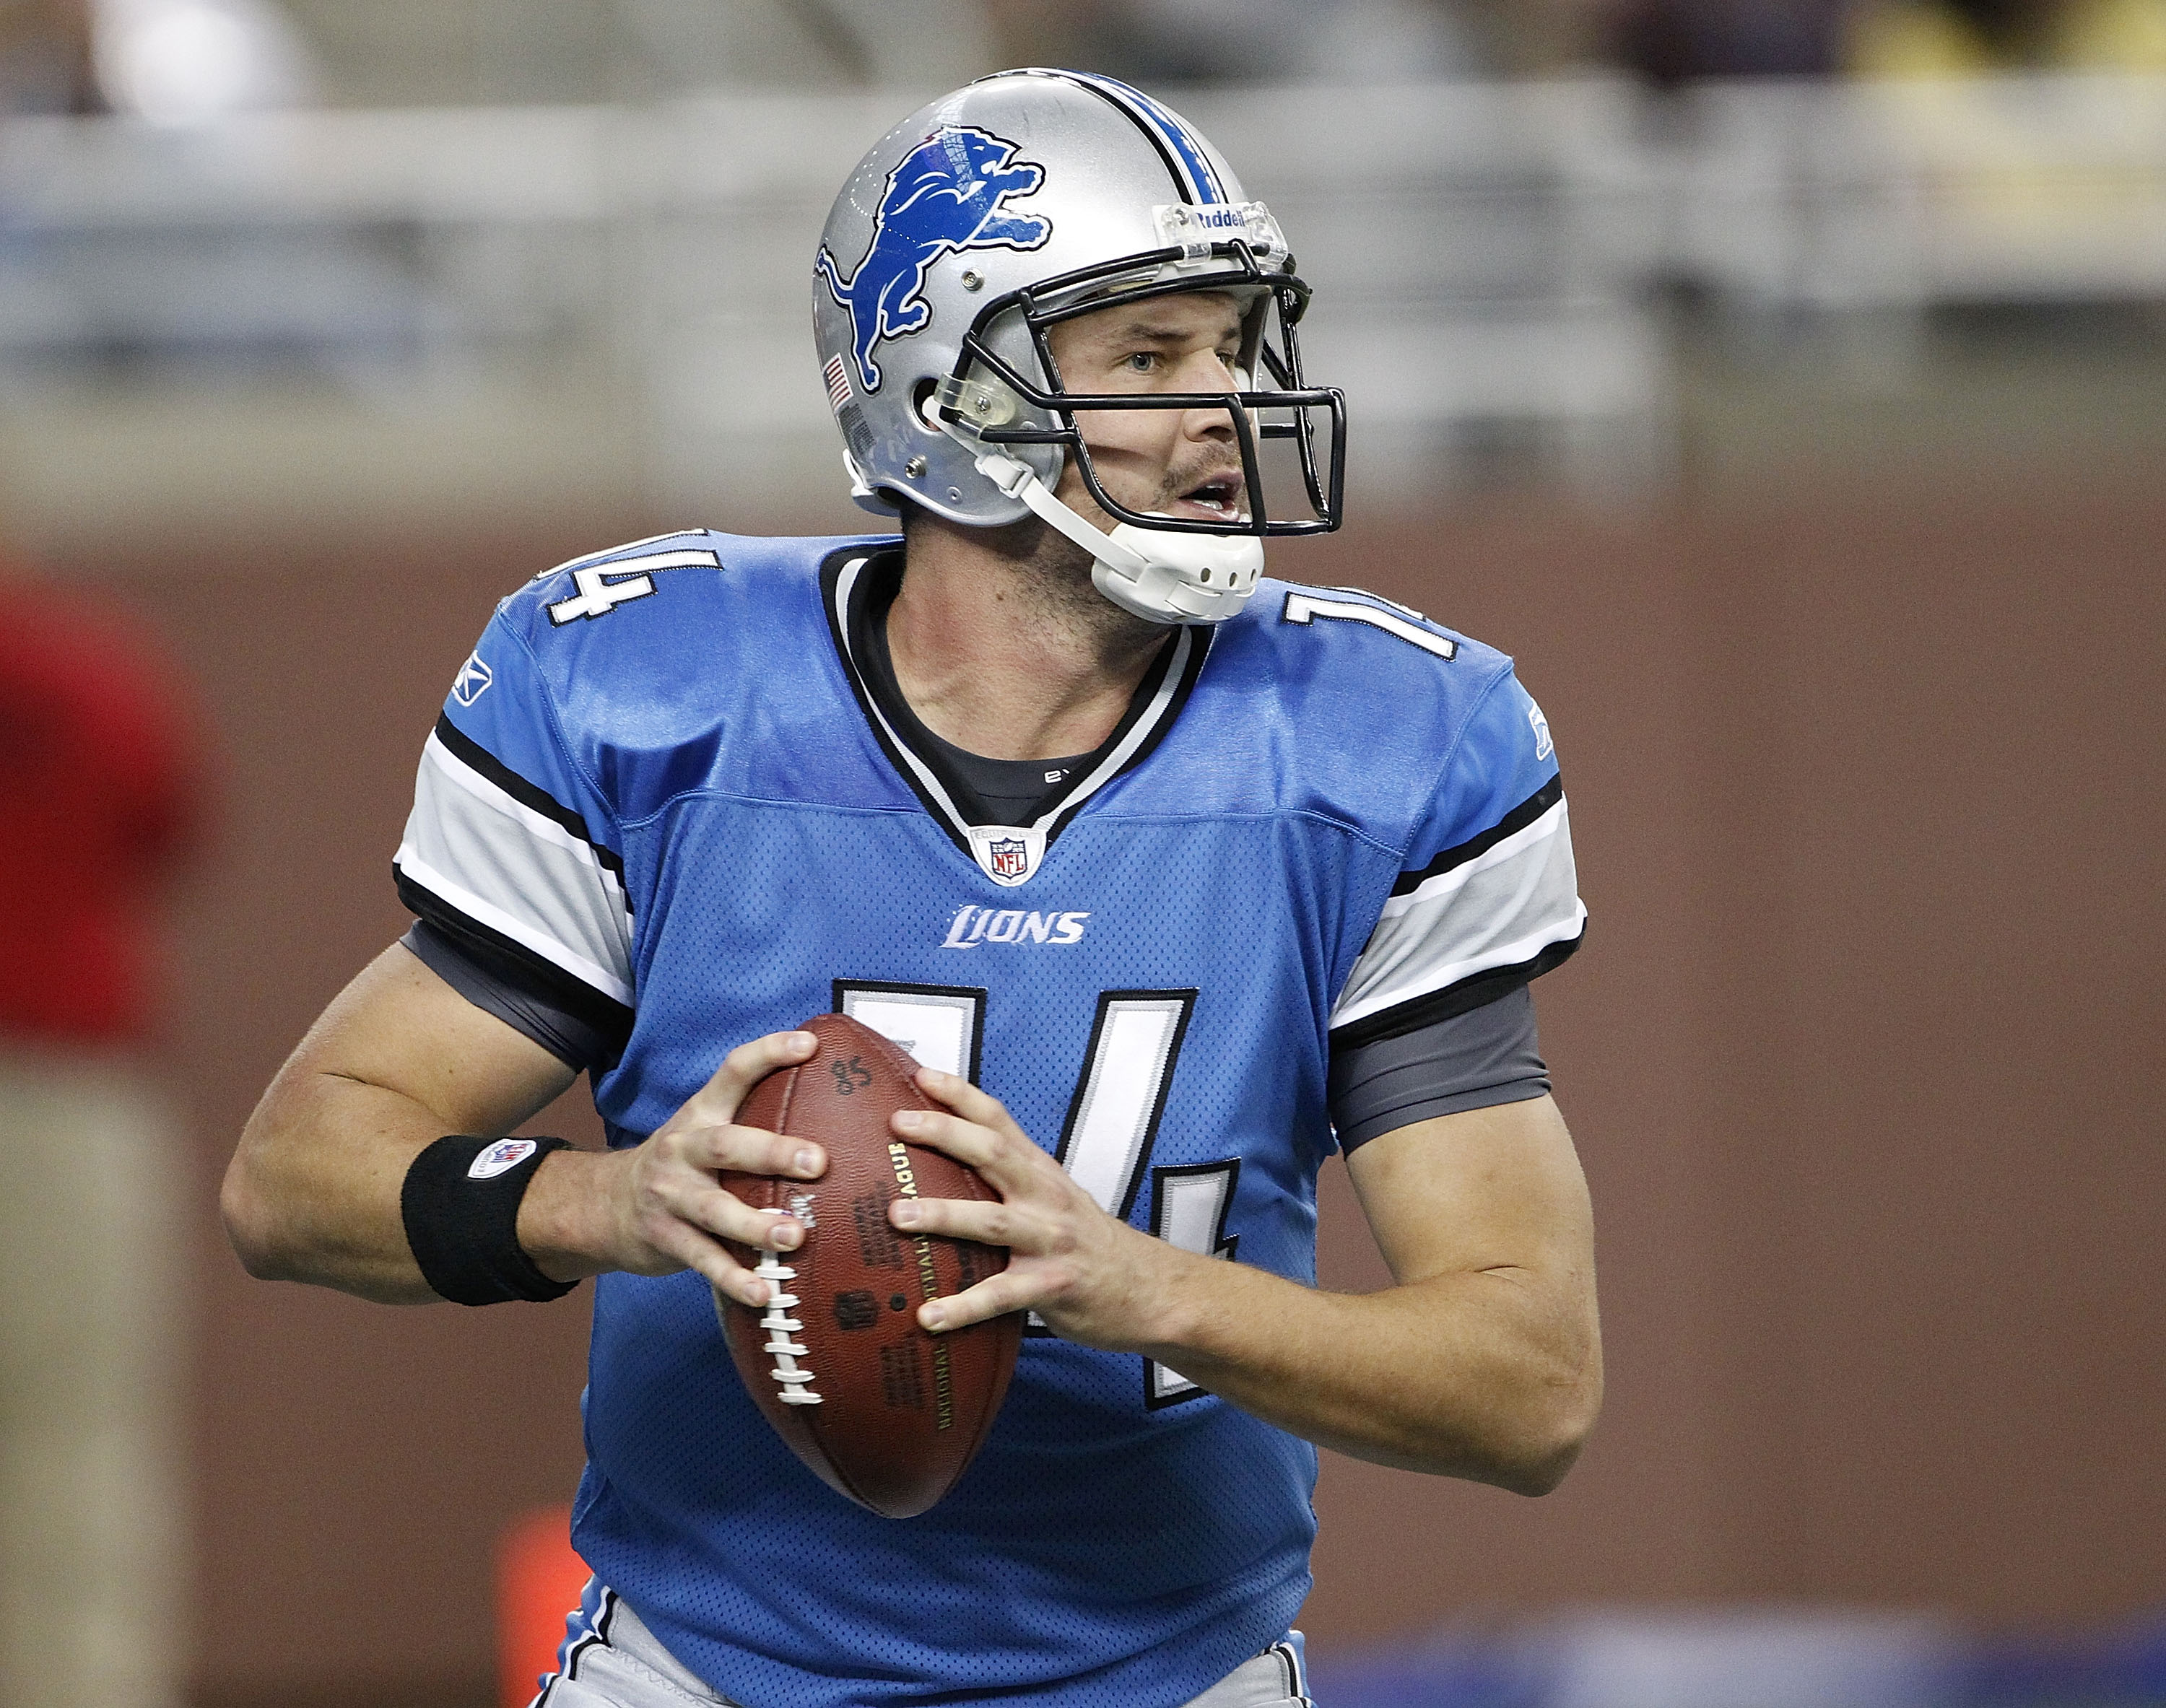 DETROIT - SEPTEMBER 19:  Shaun Hill #14 of the Detroit Lions drops back to pass during the game against the Philadelphia Eagles at Ford Field on September 19, 2010 in Detroit, Michigan. The Eagles defeated the Lions 35-32.  (Photo by Leon Halip/Getty Imag